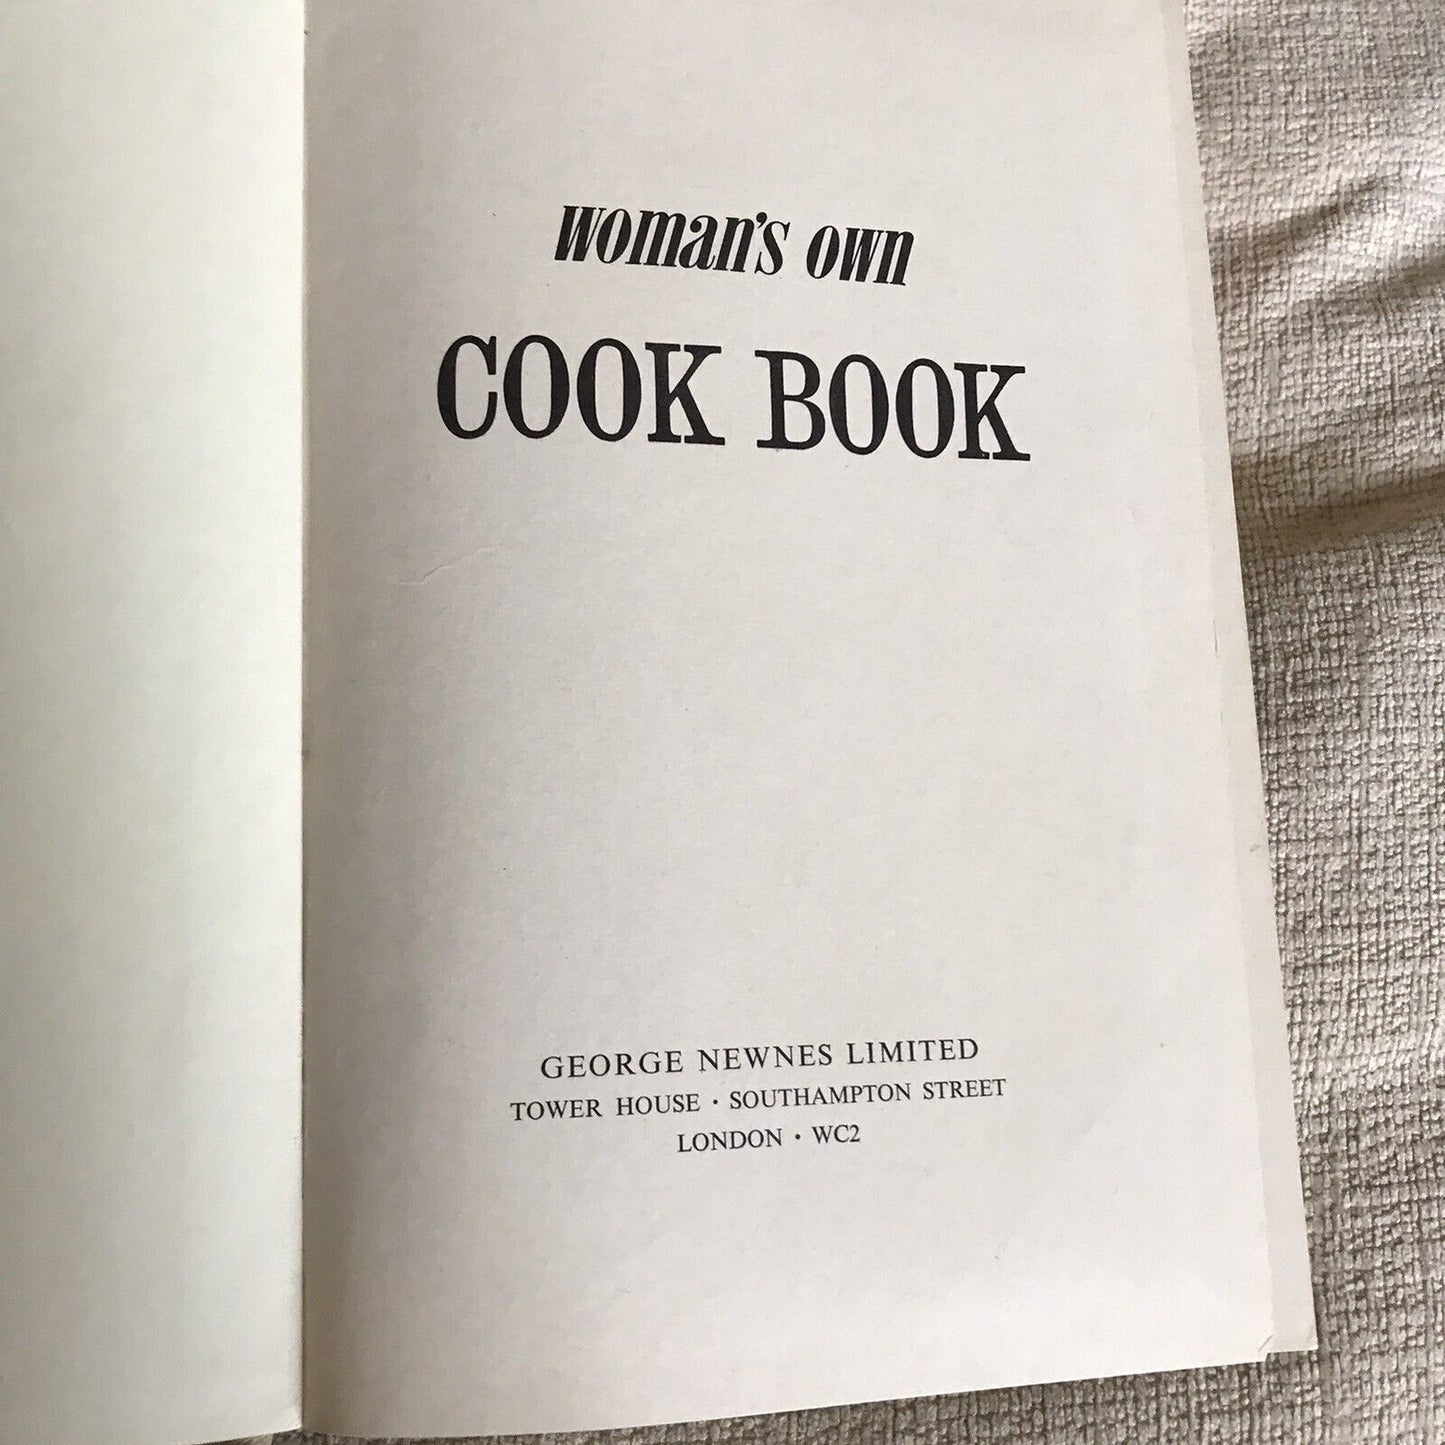 1964 Woman’s Own Cook Book (George Newnes Pub)